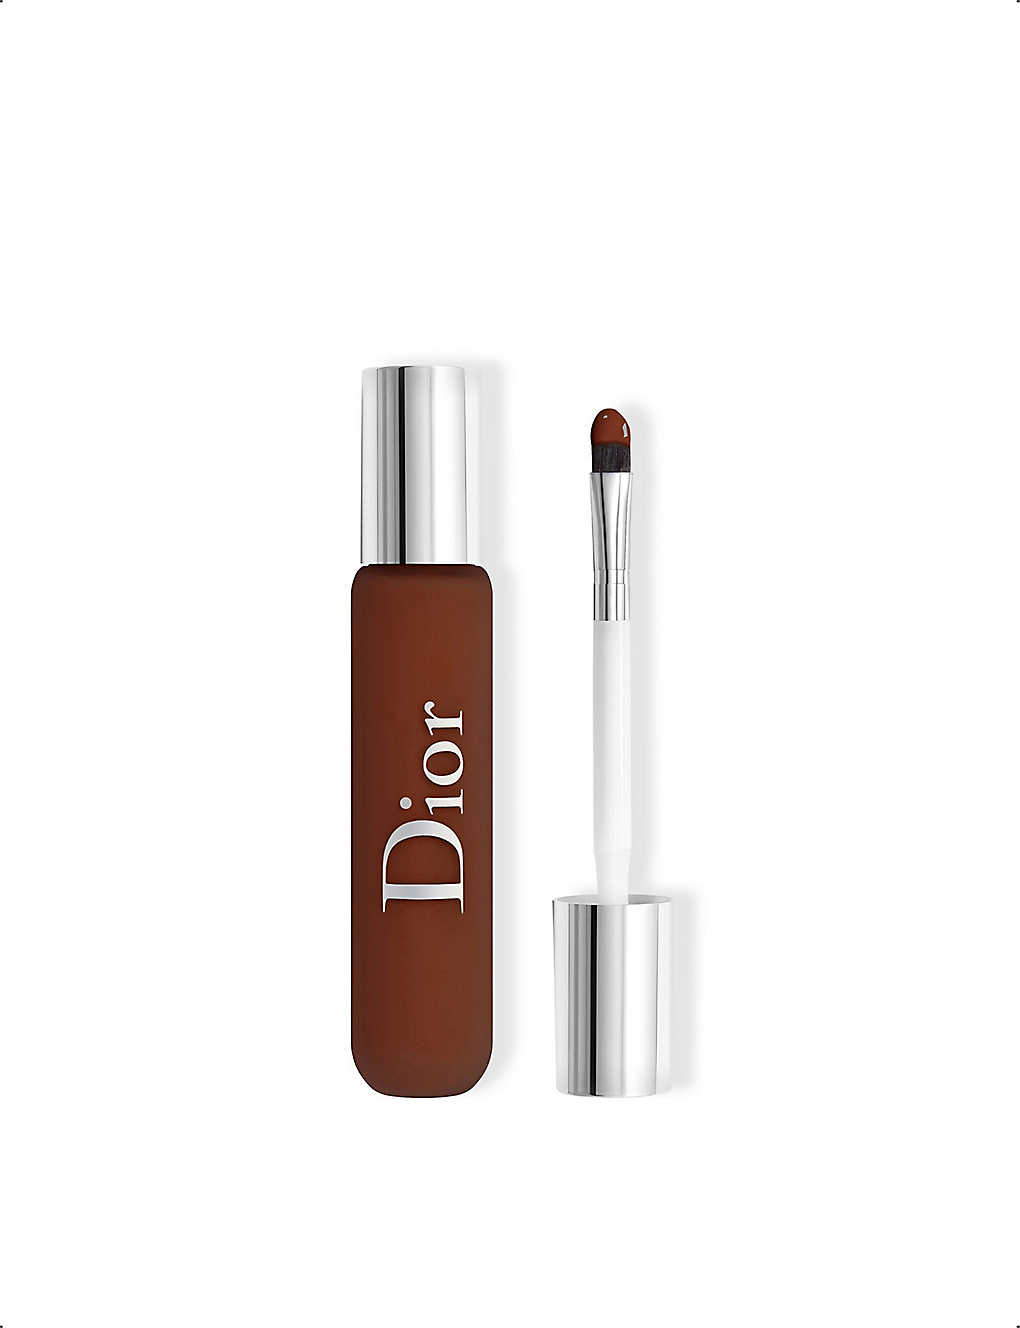 Dior 9n Backstage Face & Body Flash Perfector Concealer 11ml